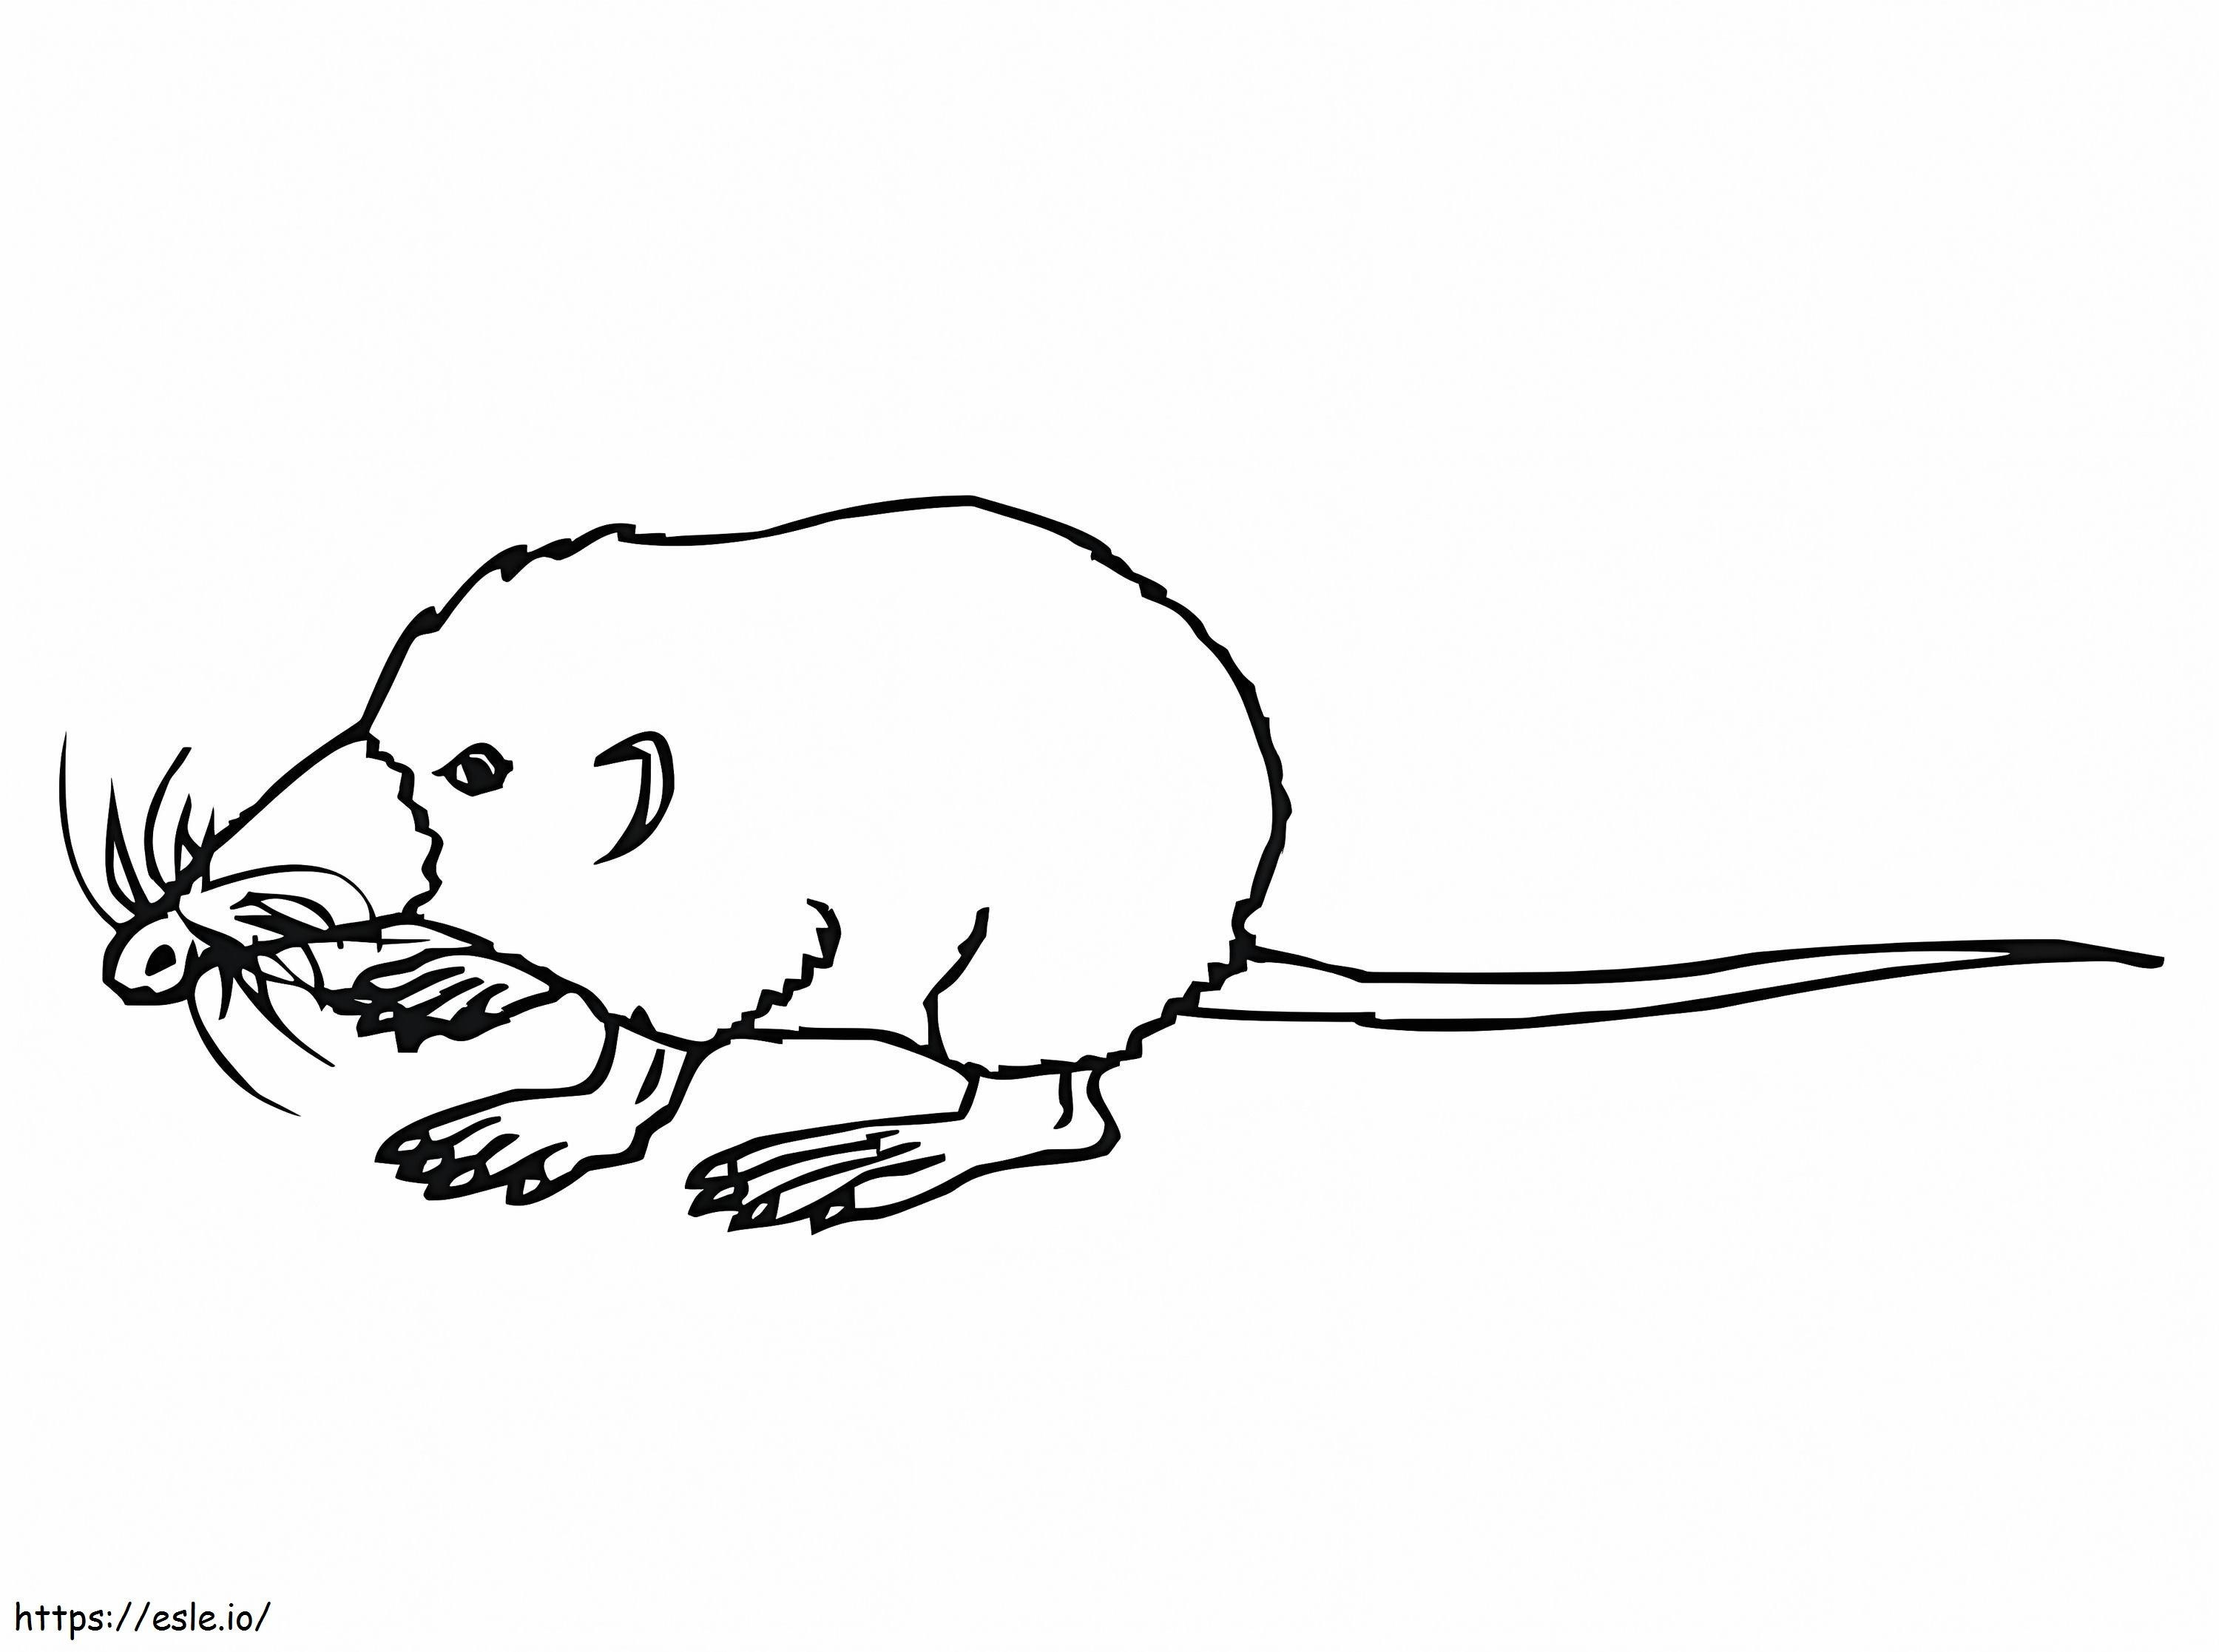 Cute Shrew coloring page